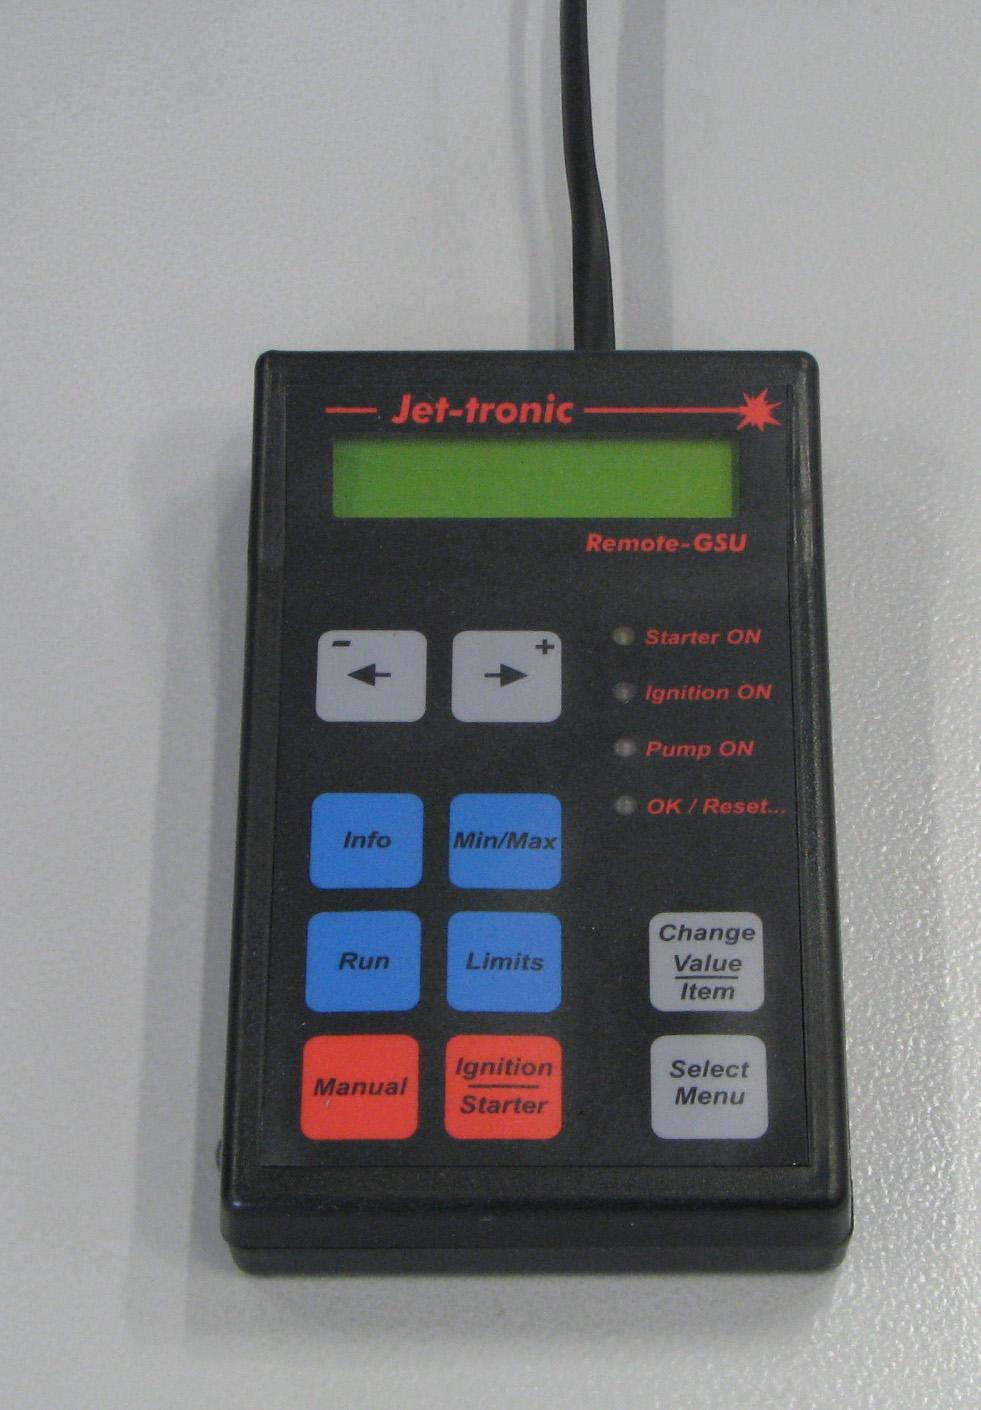 Connecting the (Jet-tronic) display and programming unit provides additional useful